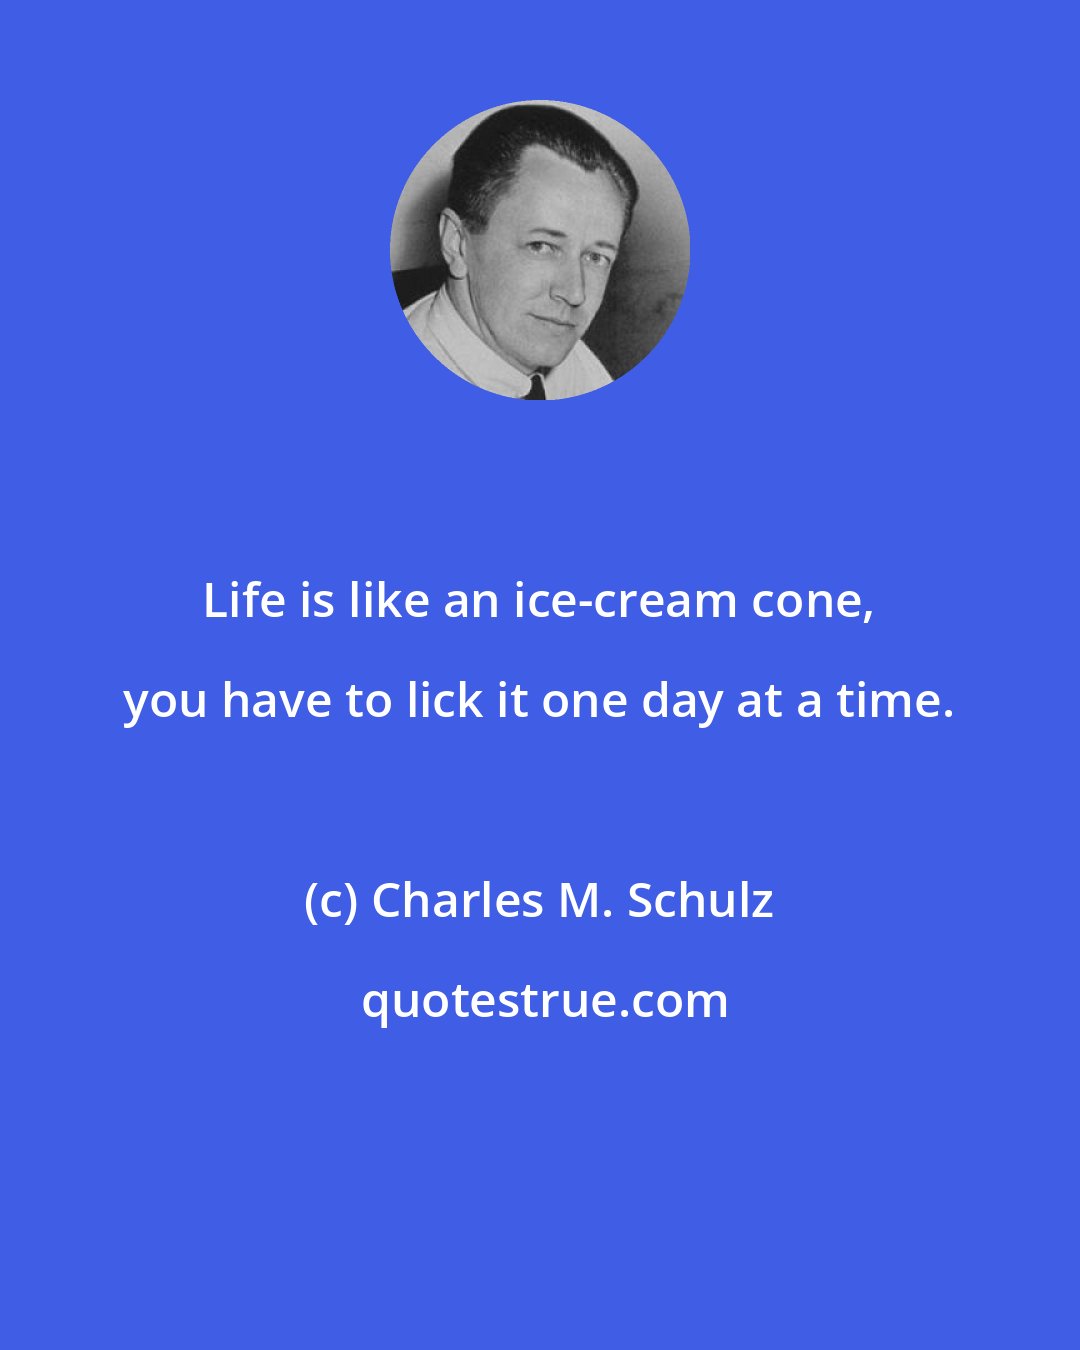 Charles M. Schulz: Life is like an ice-cream cone, you have to lick it one day at a time.